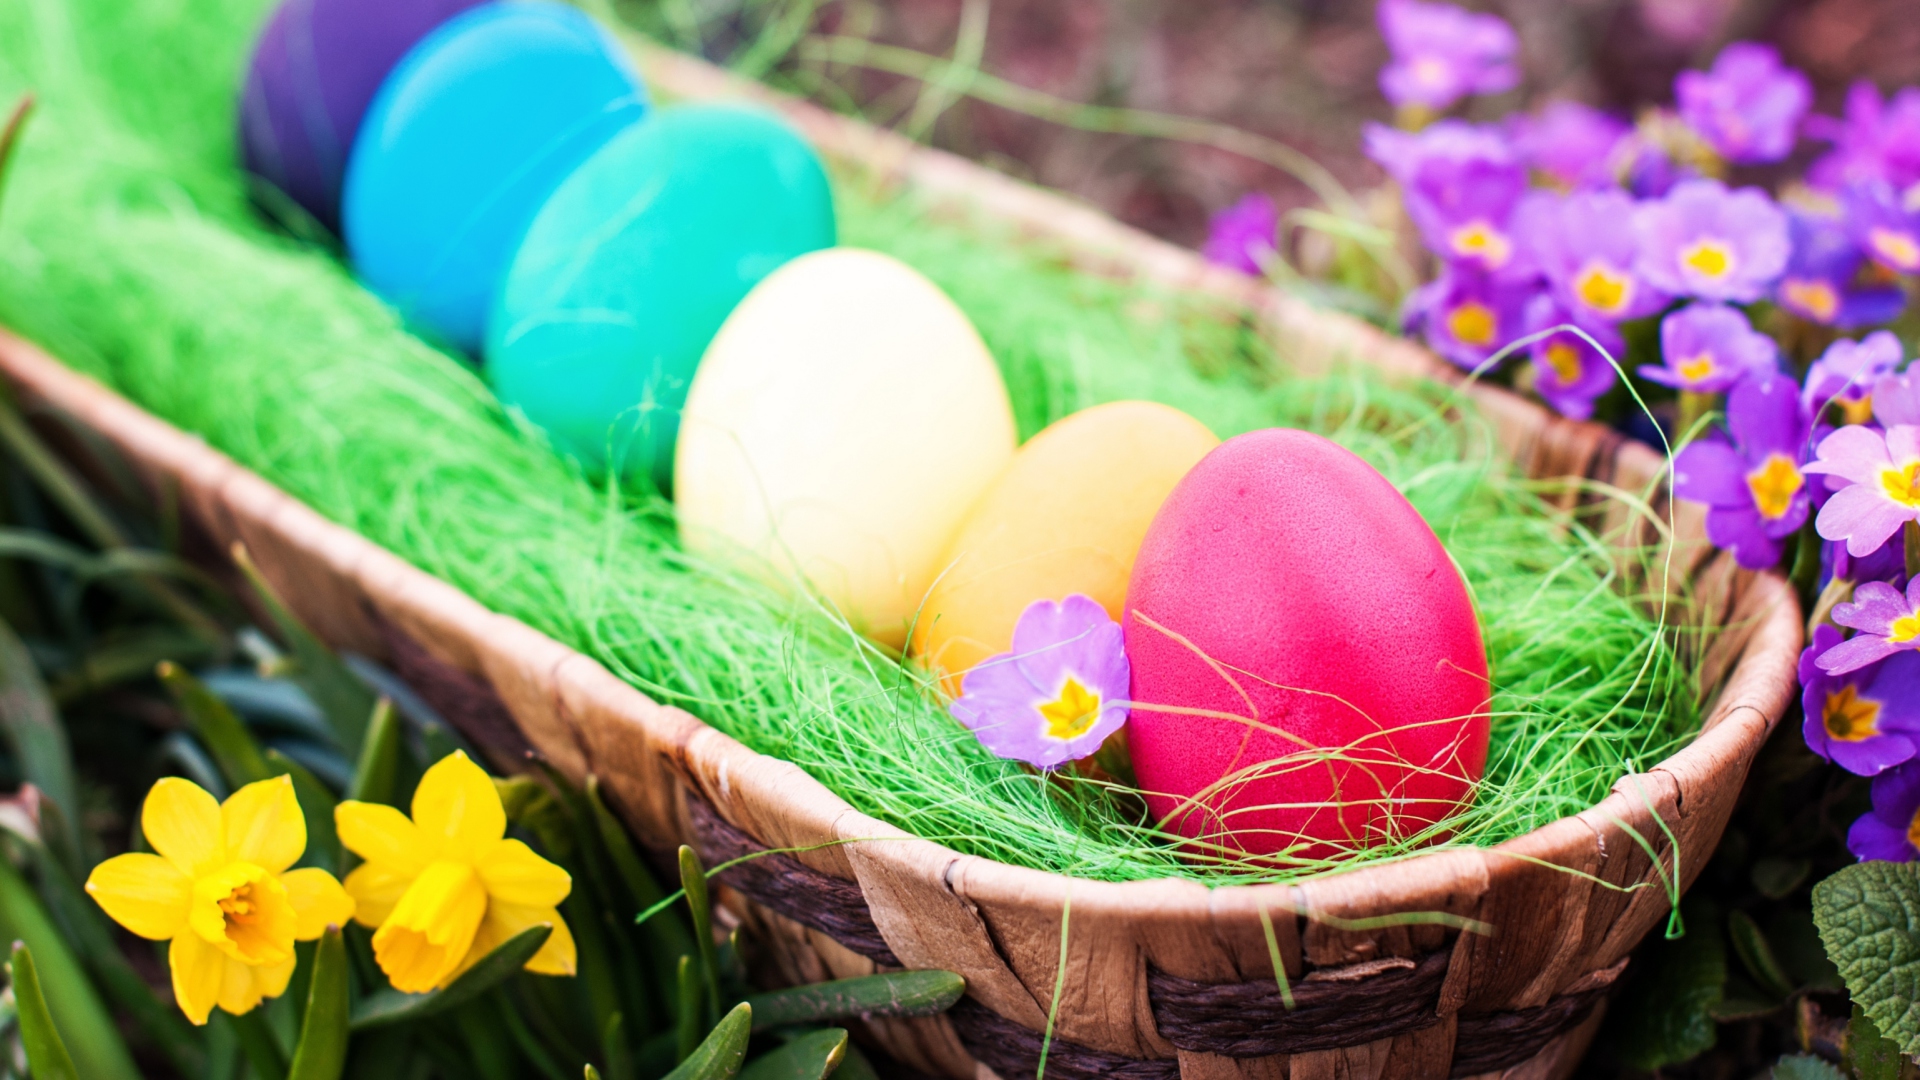 Colorful Easter Eggs wallpaper 1920x1080